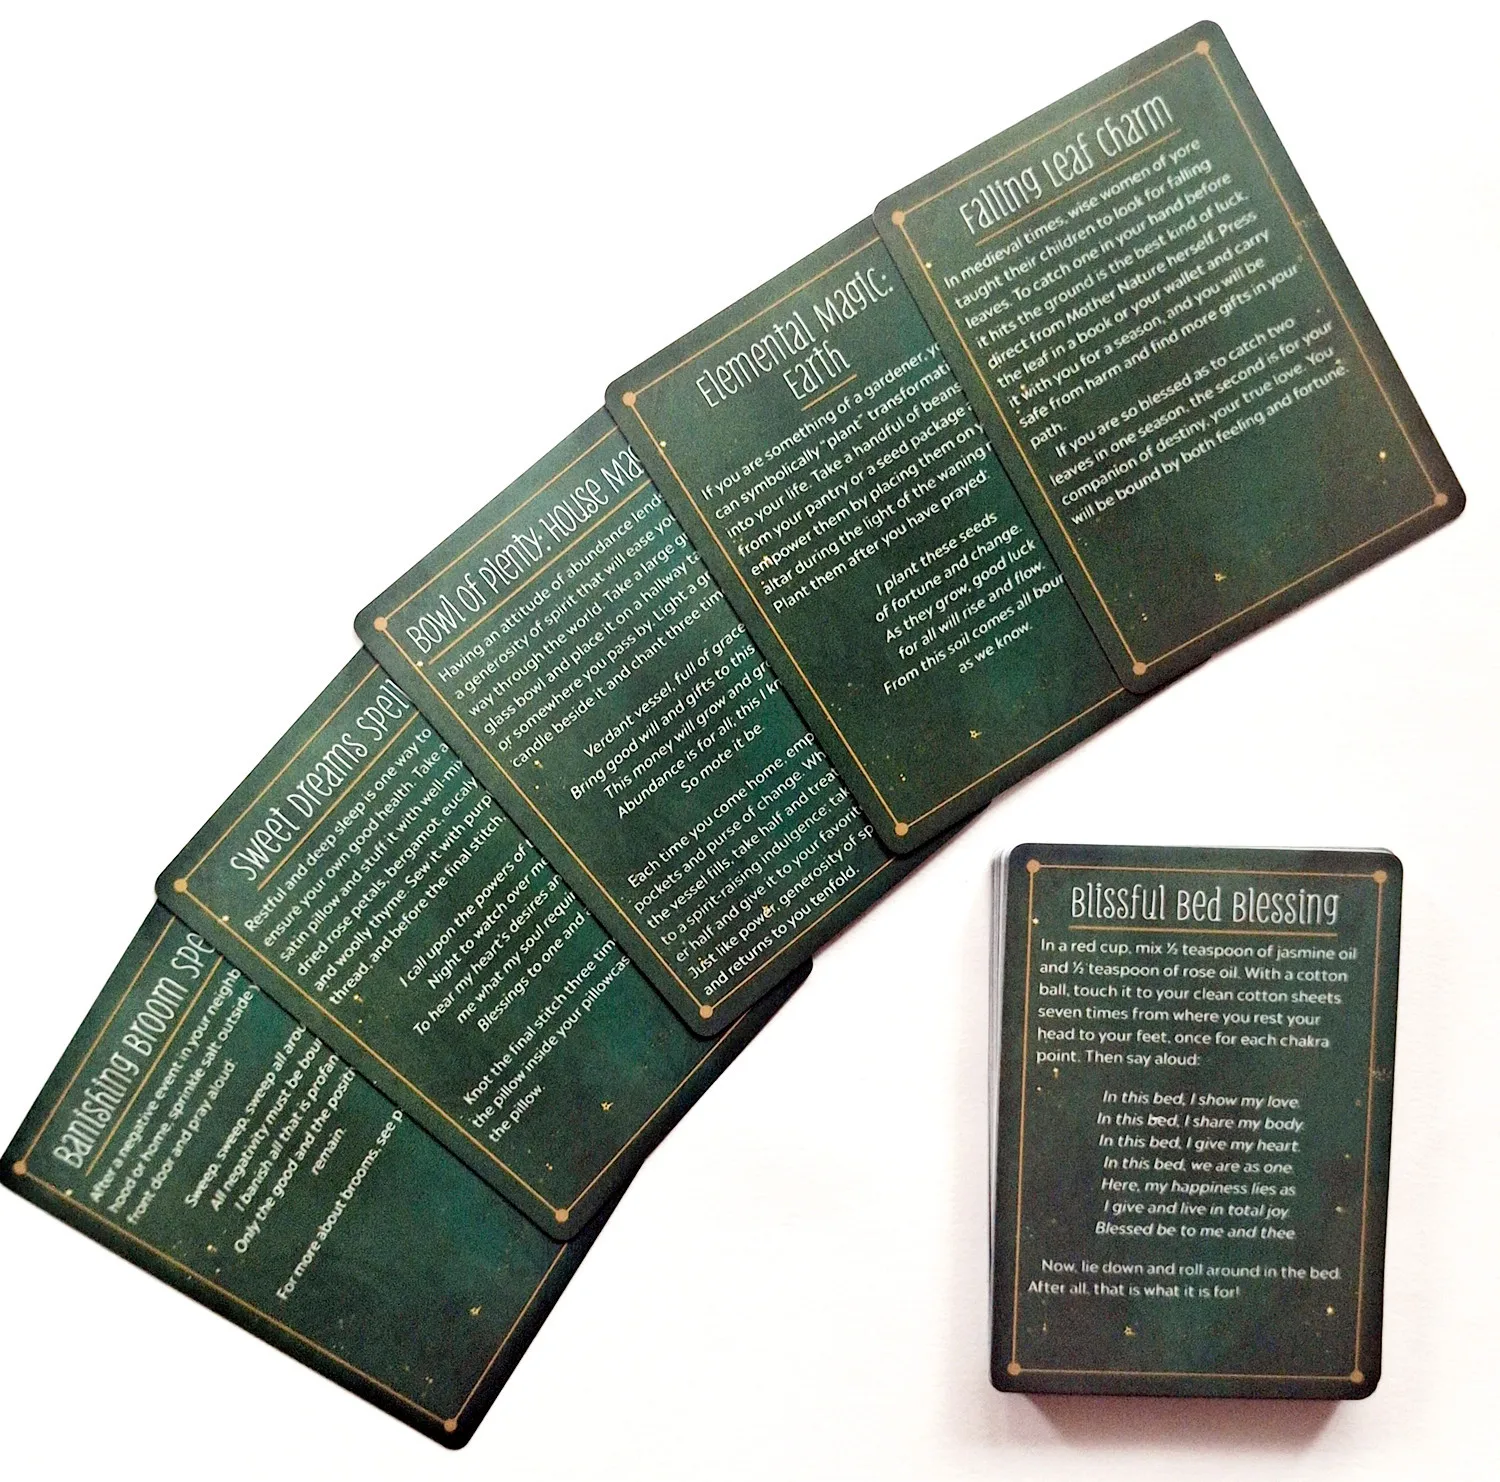 100PCS Practical Witch's Spell Oracle Tarot Cards Deck English Tarot Board Games Divination Fate Home Family Entertainment Games